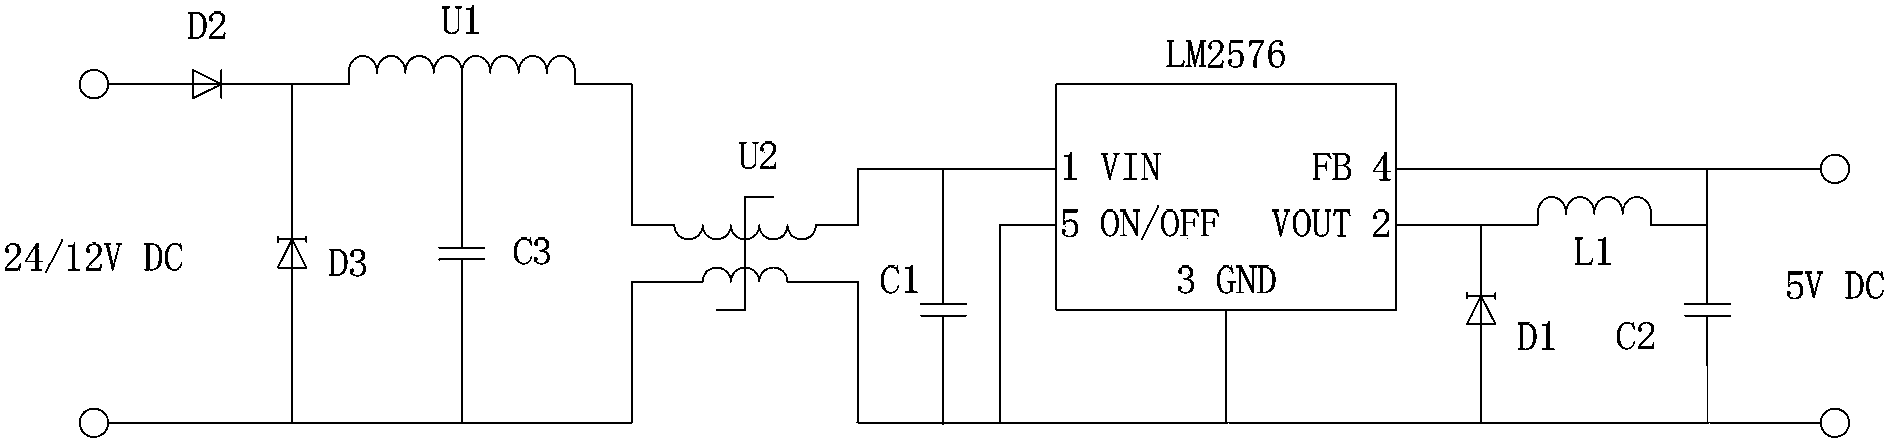 Wireless signal relay system capable of automatically controlling and monitoring